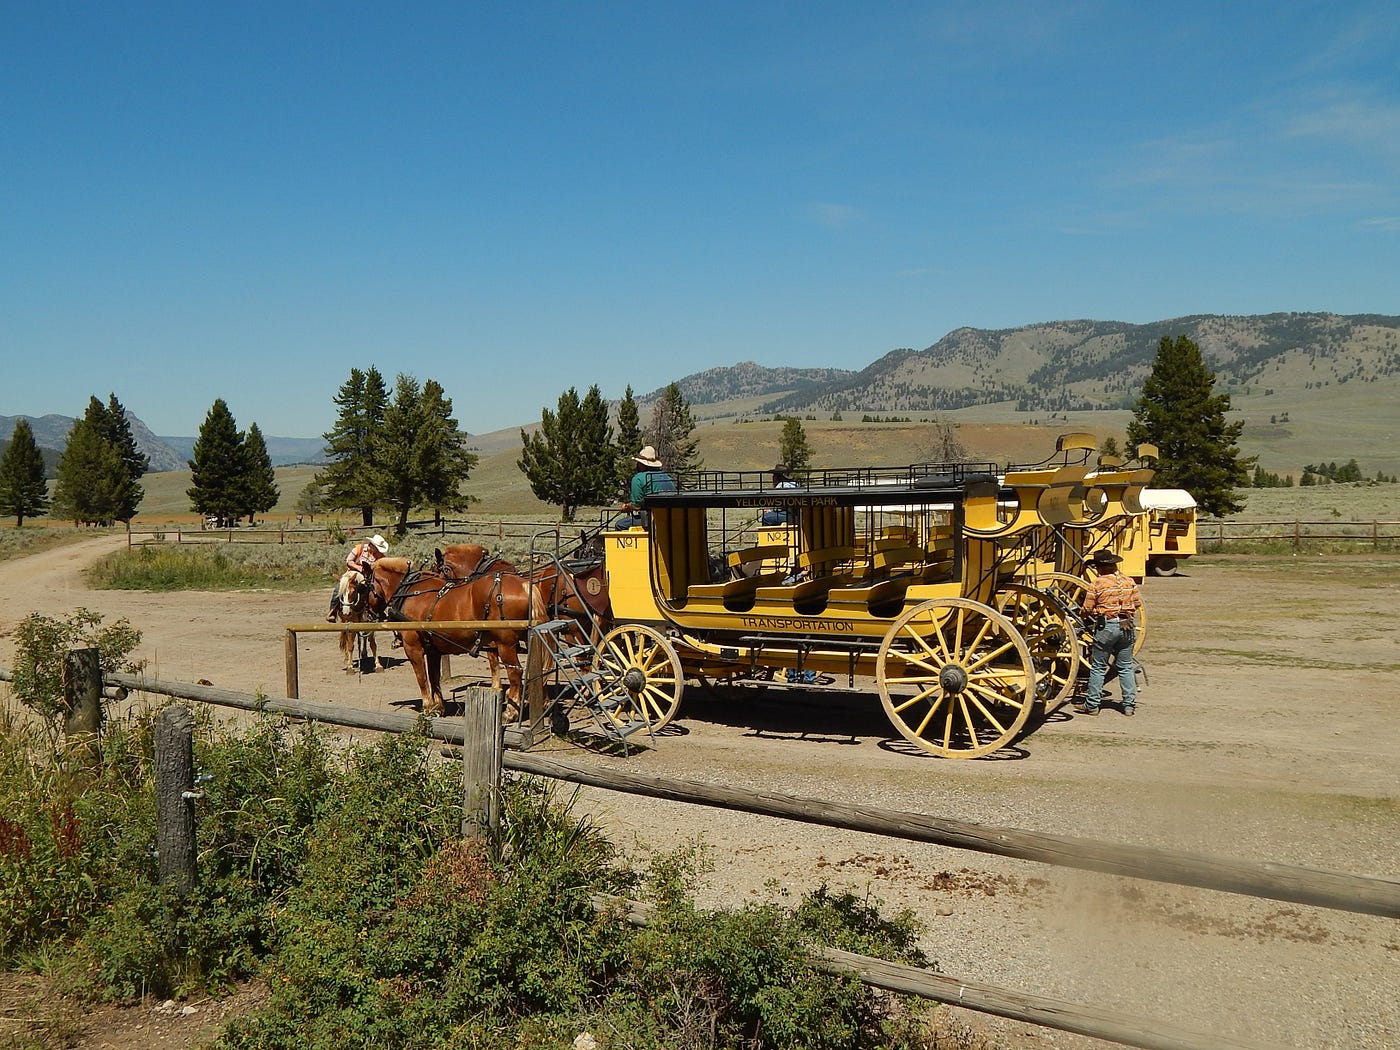 A scene depicting pioneers in the American west. A horse-drawn wagon on a dirt trail.